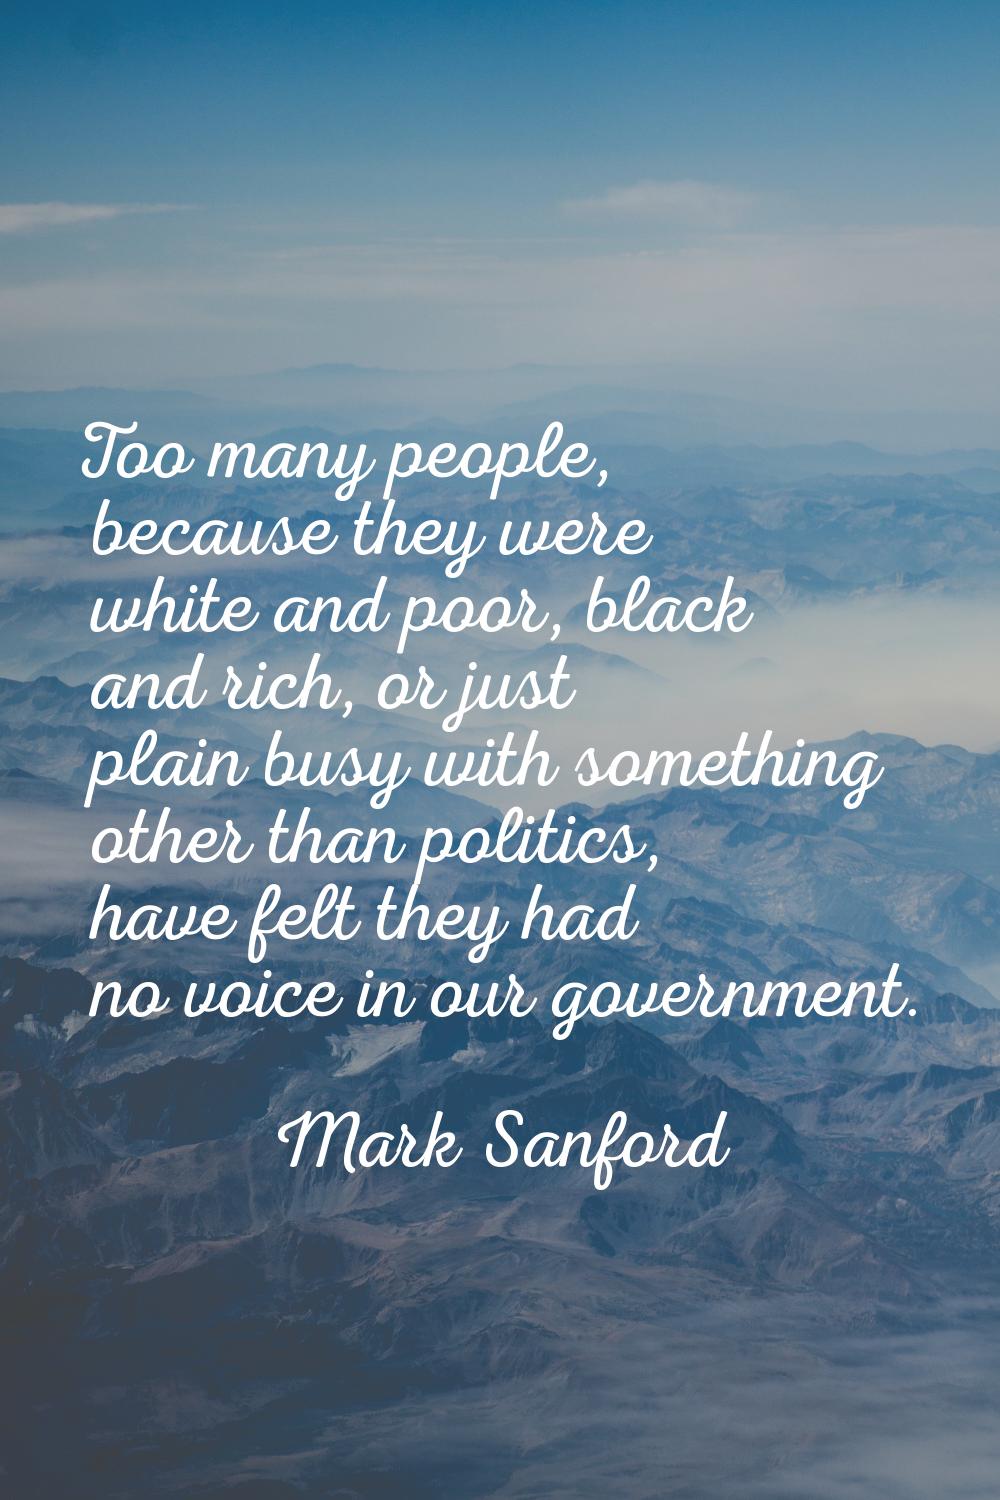 Too many people, because they were white and poor, black and rich, or just plain busy with somethin